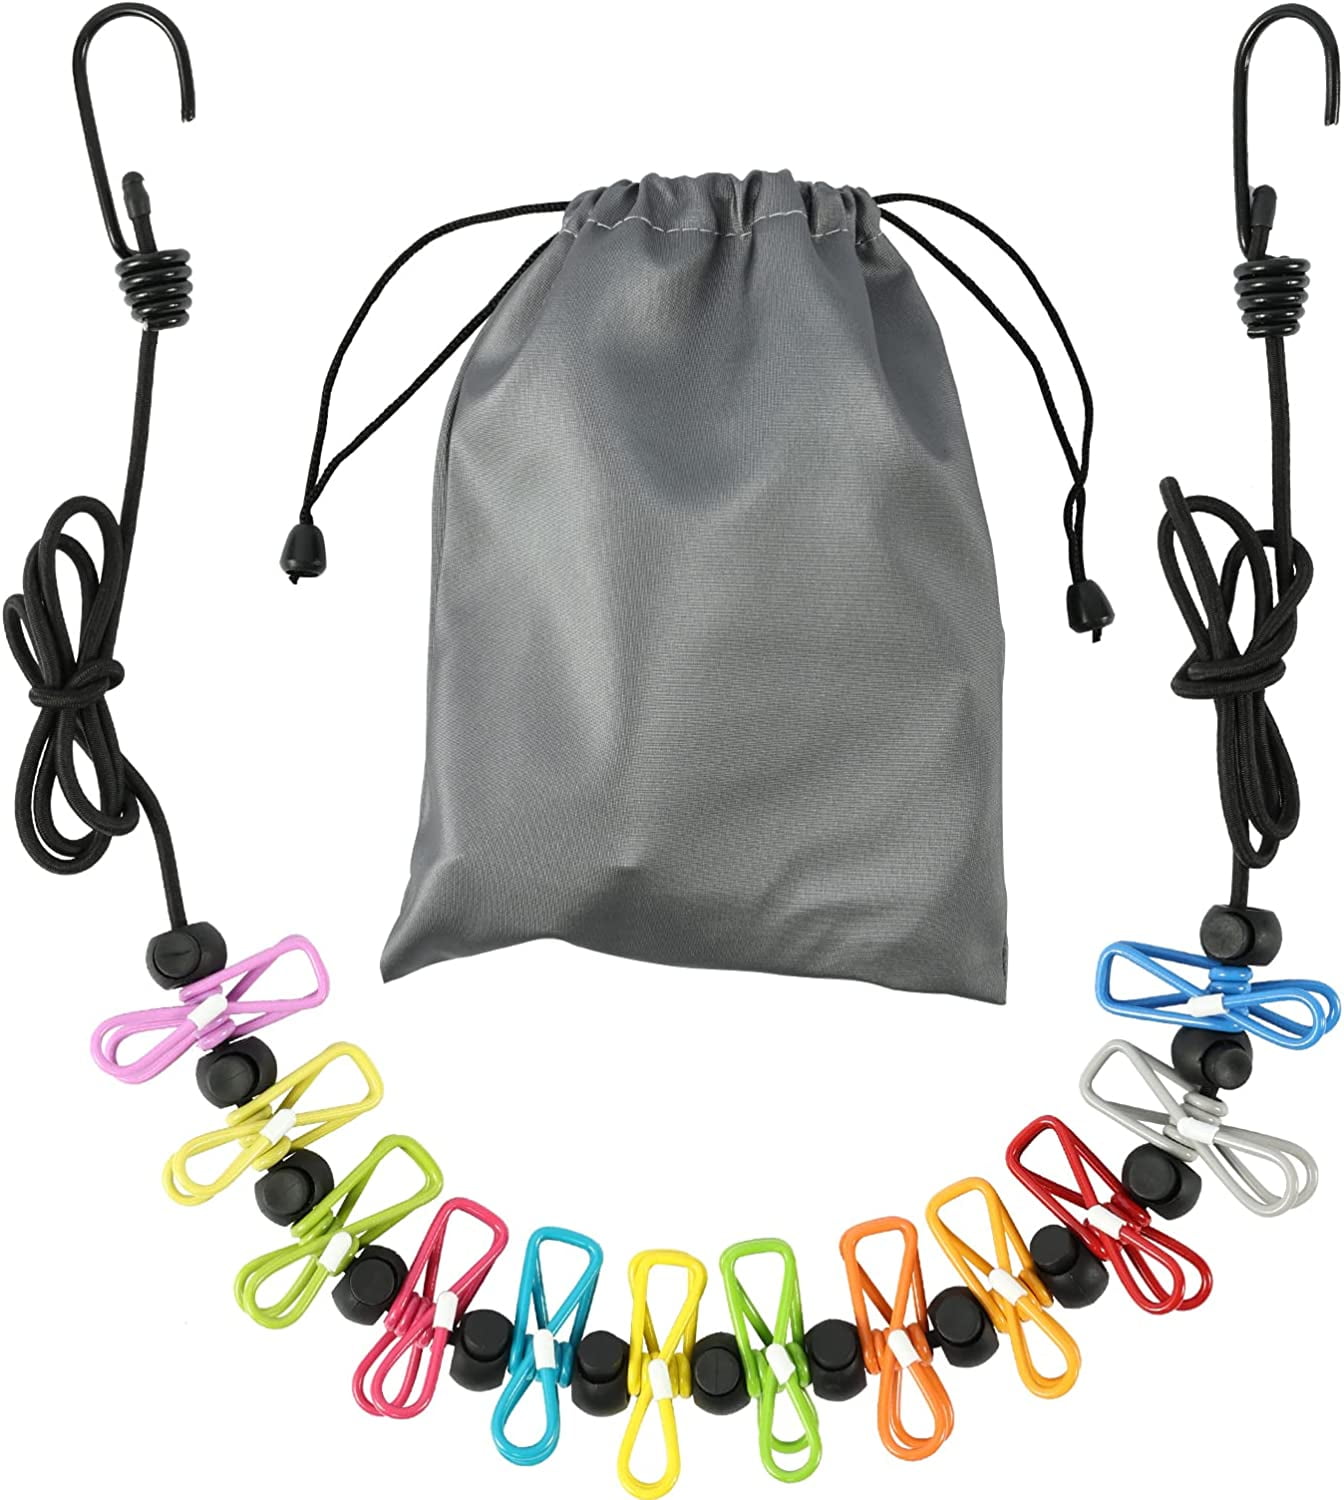 Retractable Portable Clothesline for TravelClothing line with 12